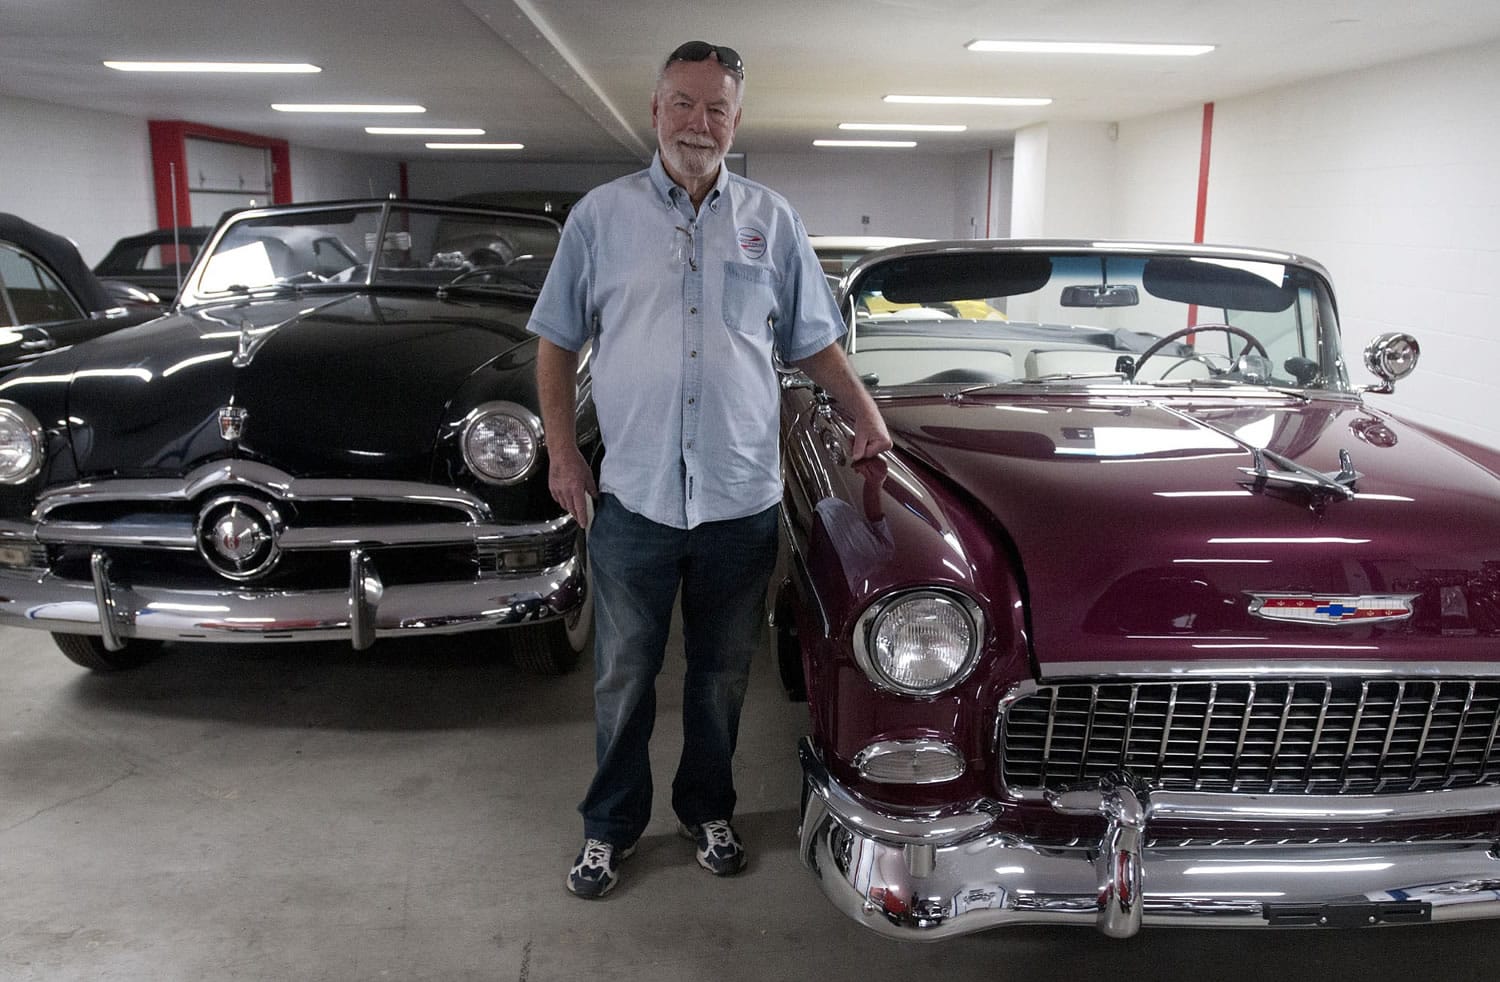 Photos by ARTHUR MOURATIDIS for The Columbian
Collector Ron Wade has more than a few gems in his array of rare and restored automobiles. He soon-to-be Hazel Dell car museum will showcase a good portion of the passion he has for detail.